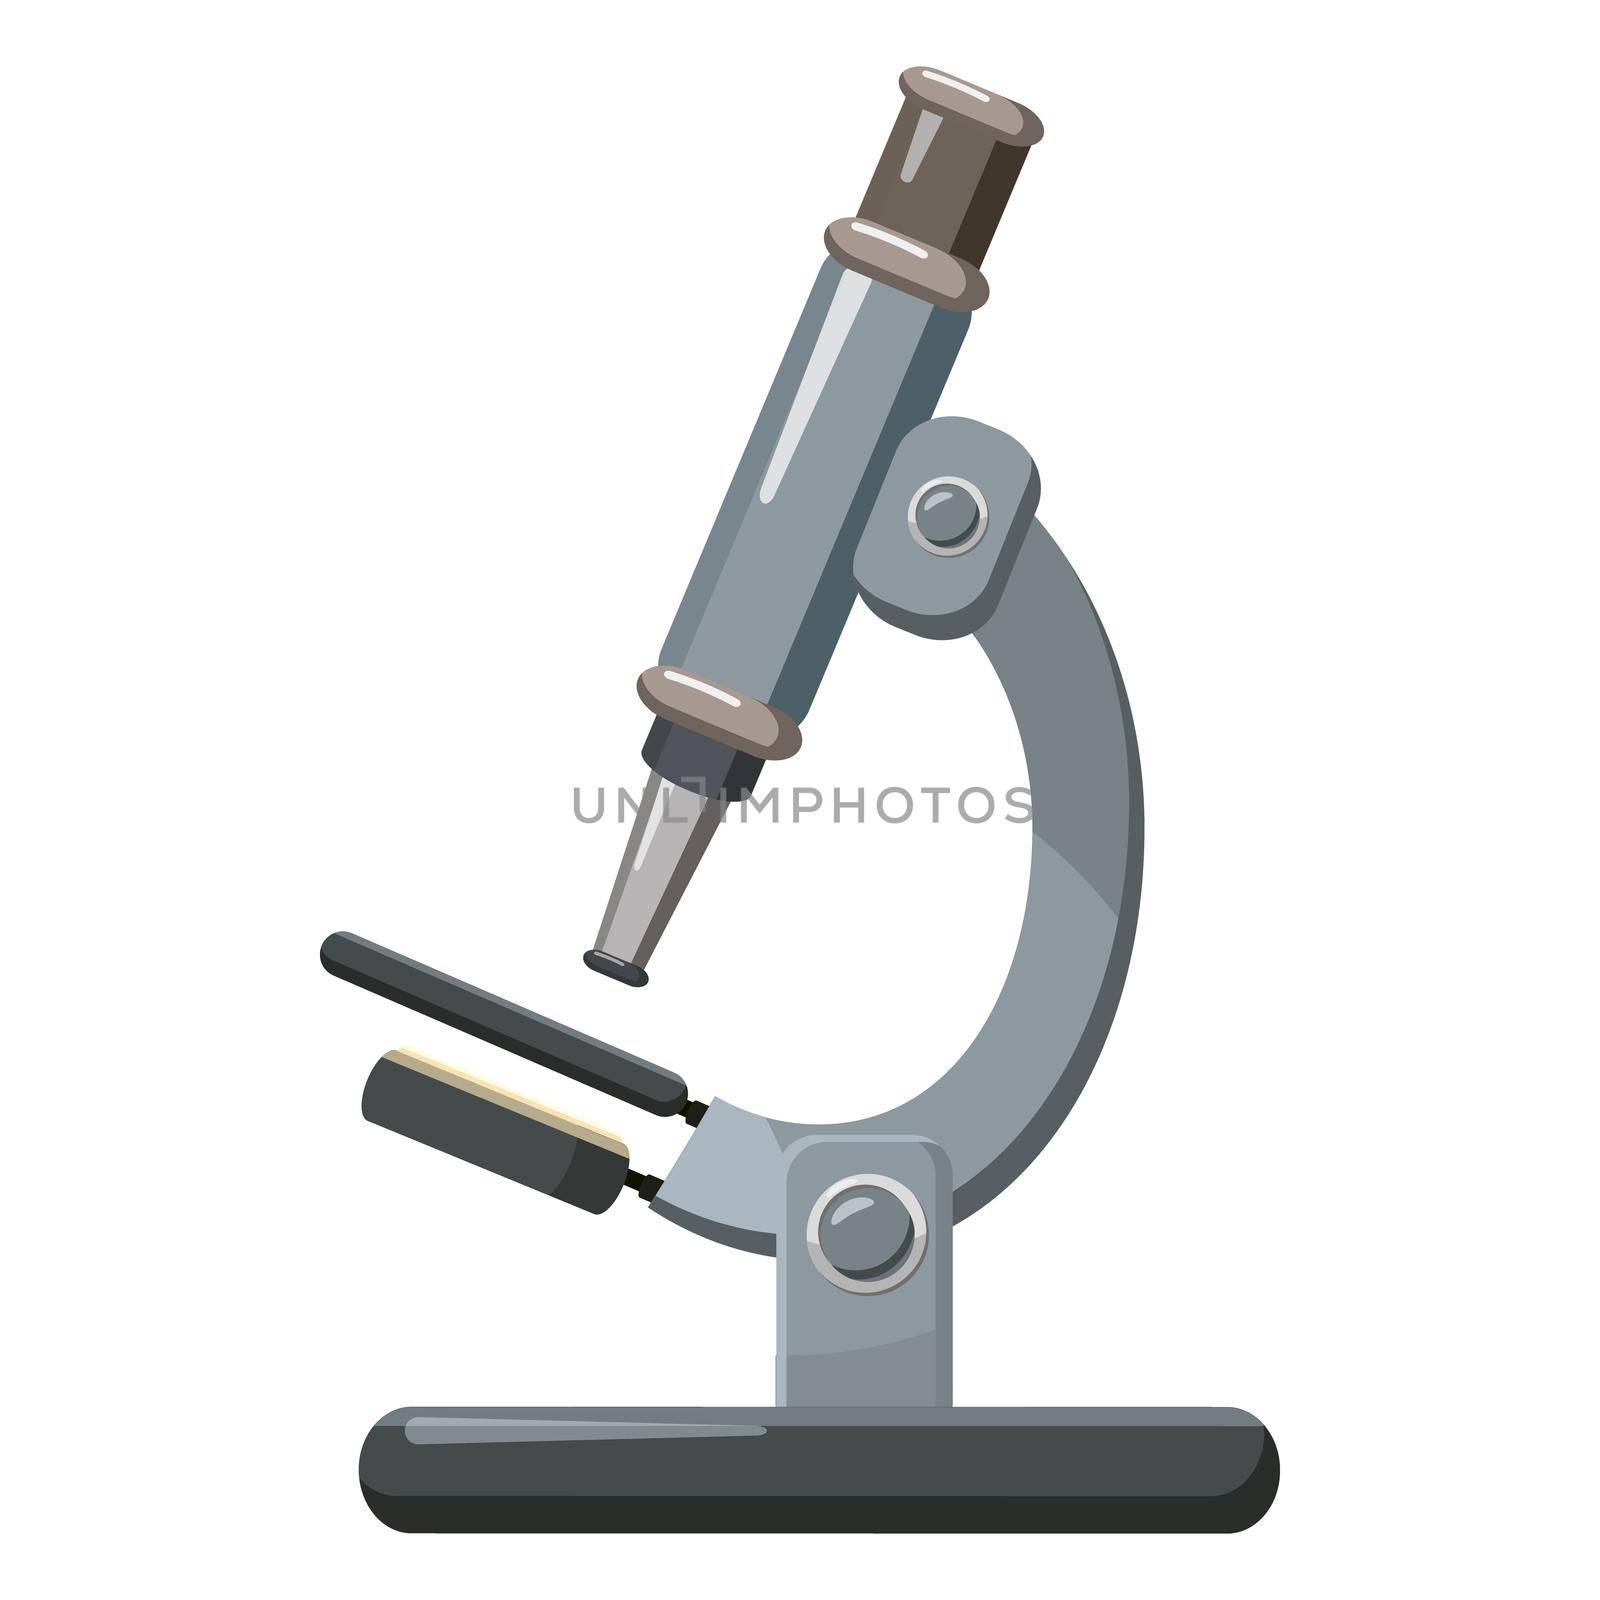 Microscope icon in cartoon style isolated on white background